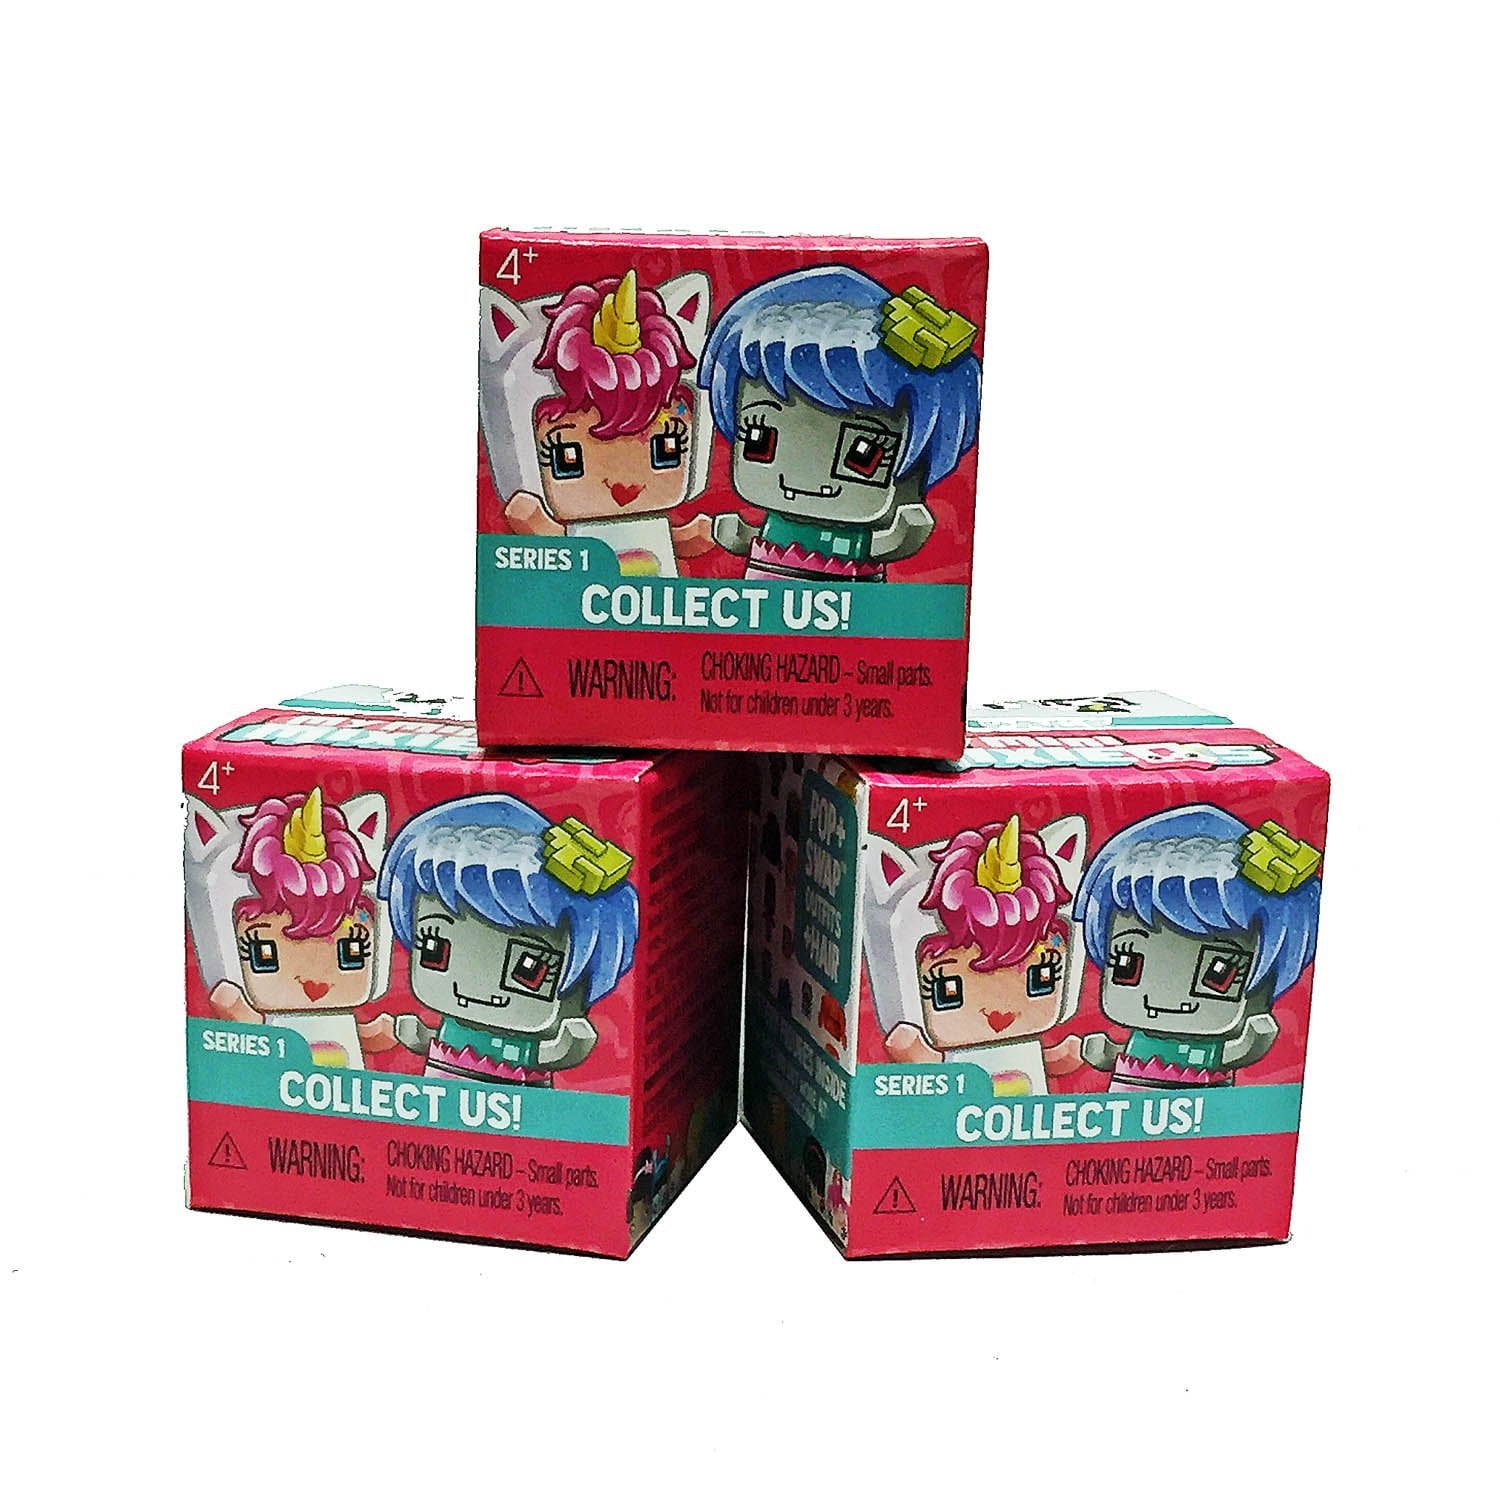 My Mini MixieQ's Series 2 Blind Box Mystery Figures - 2 count